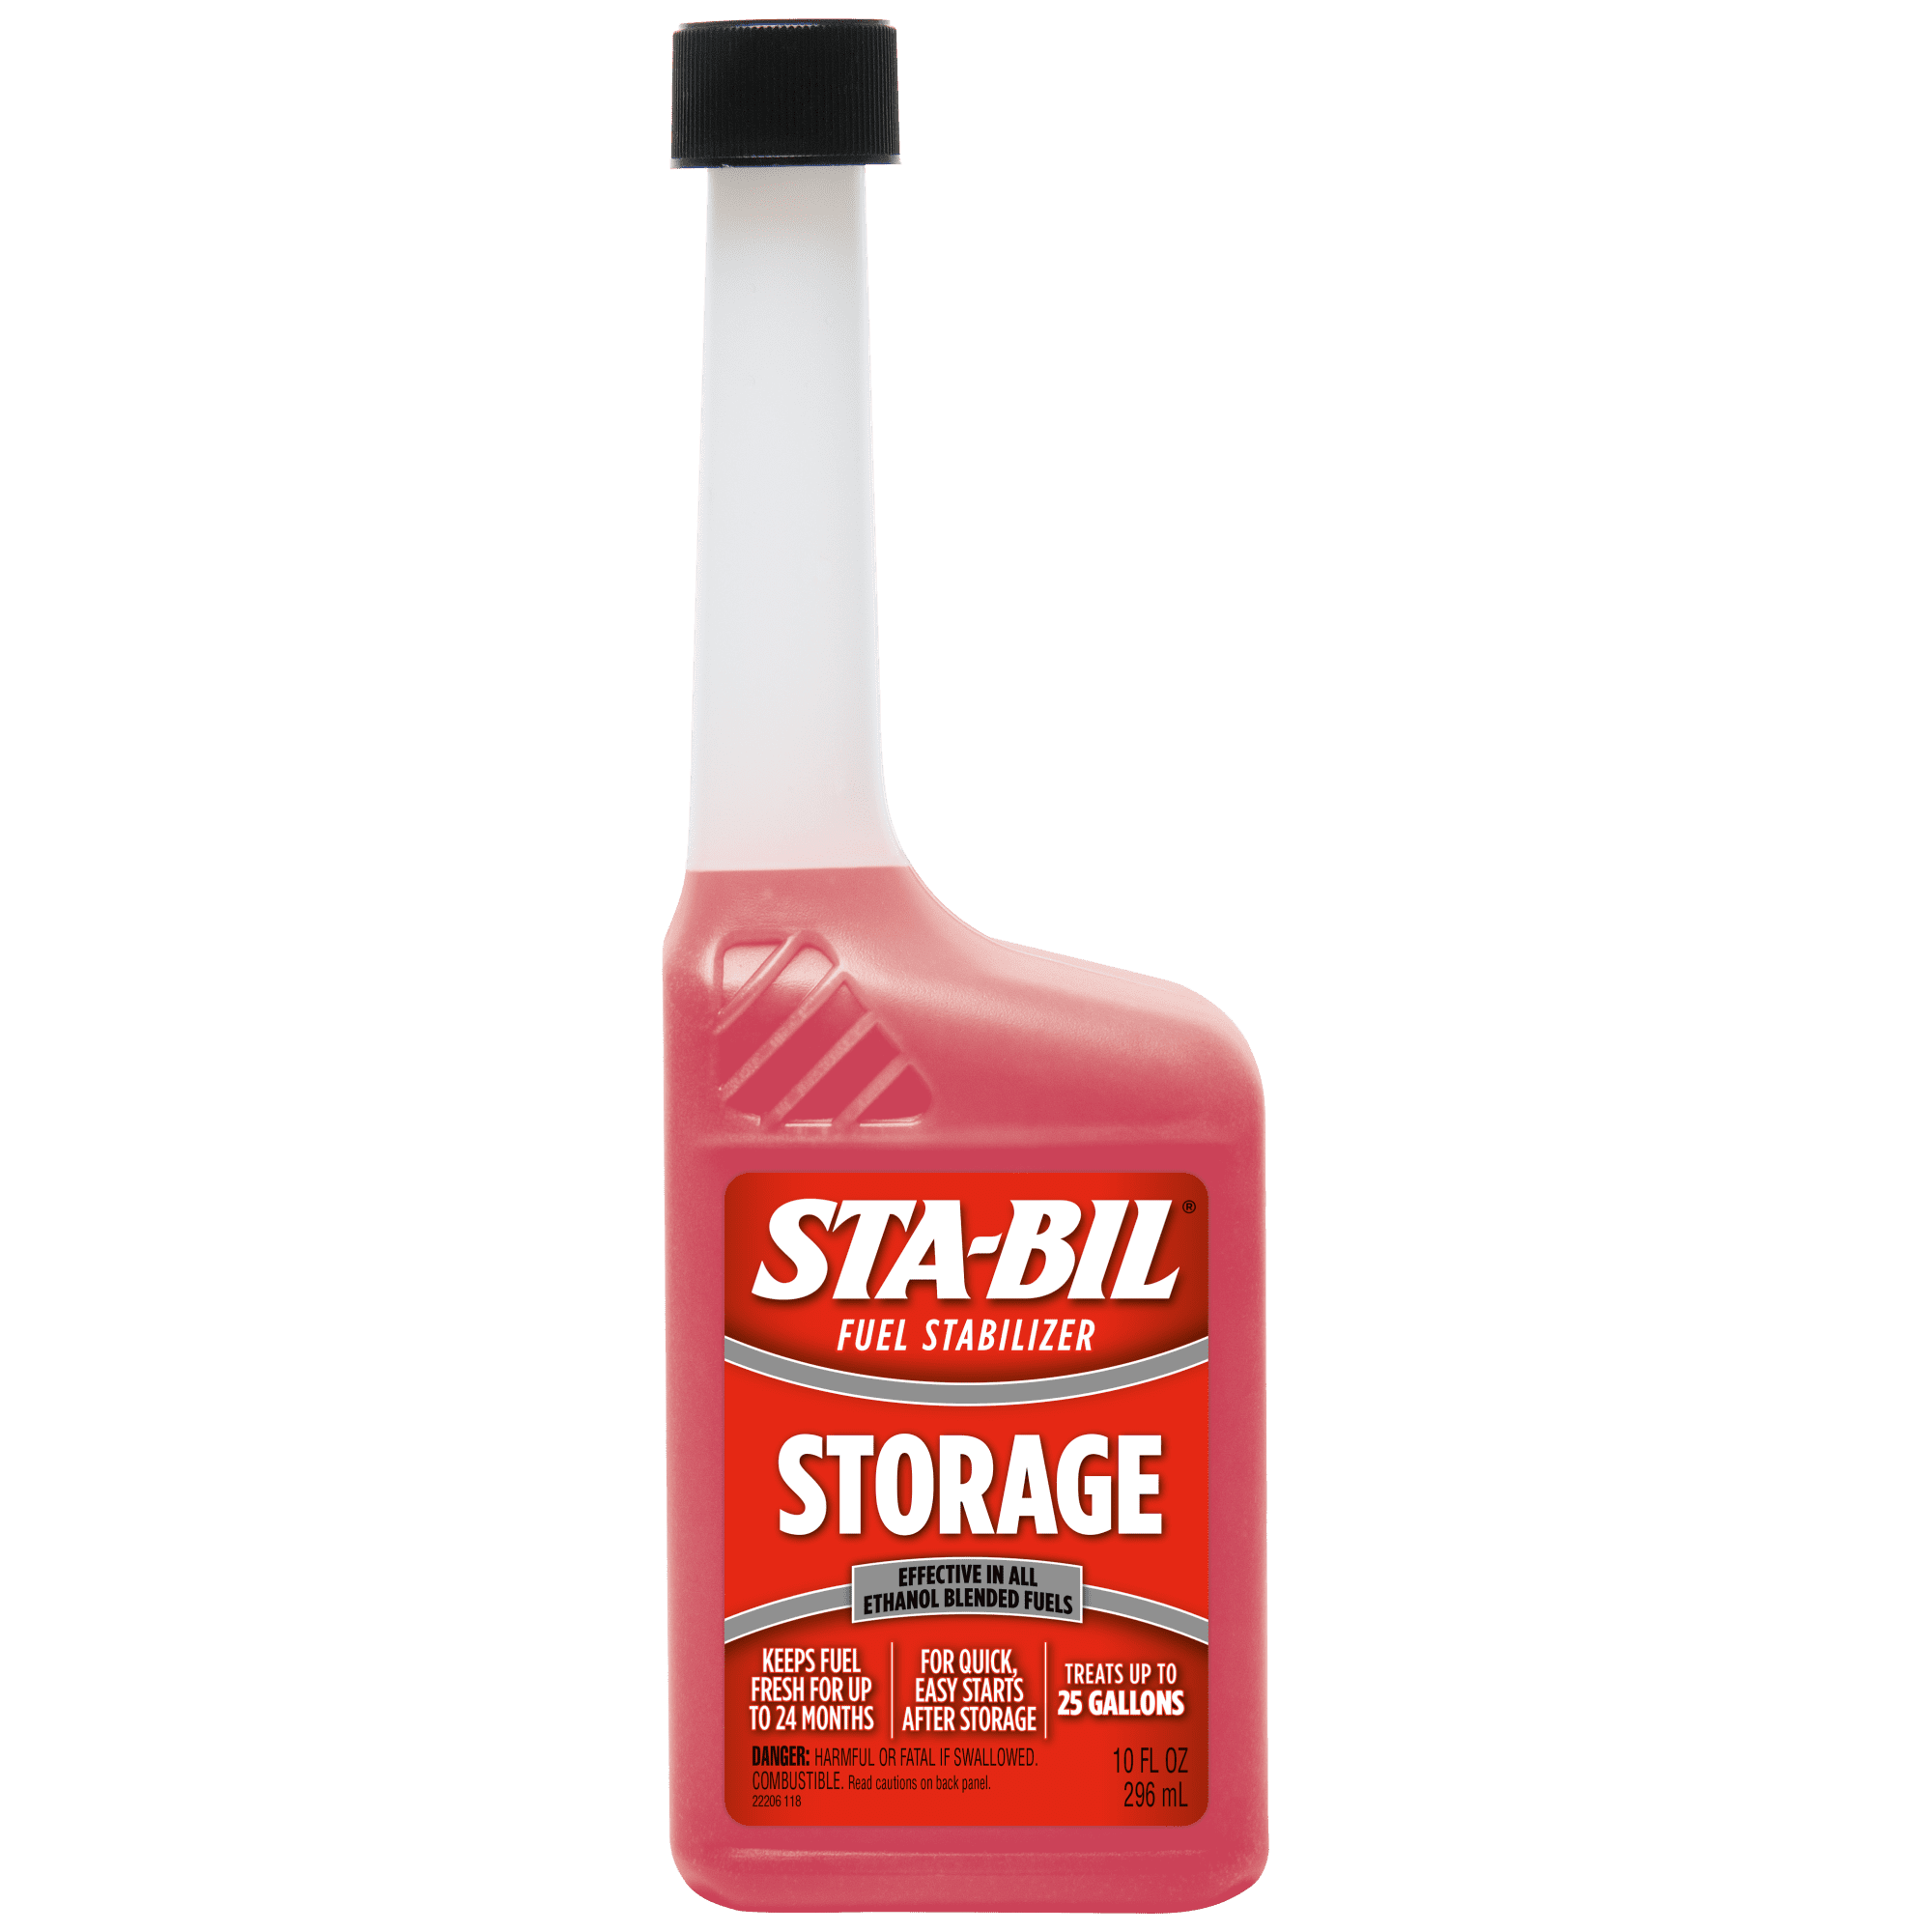 STA-BIL Storage Fuel Stabilizer - Guaranteed To Keep Fuel Fresh Fuel Up To  Two Years - Effective In All Gasoline Including All Ethanol Blended Fuels -  